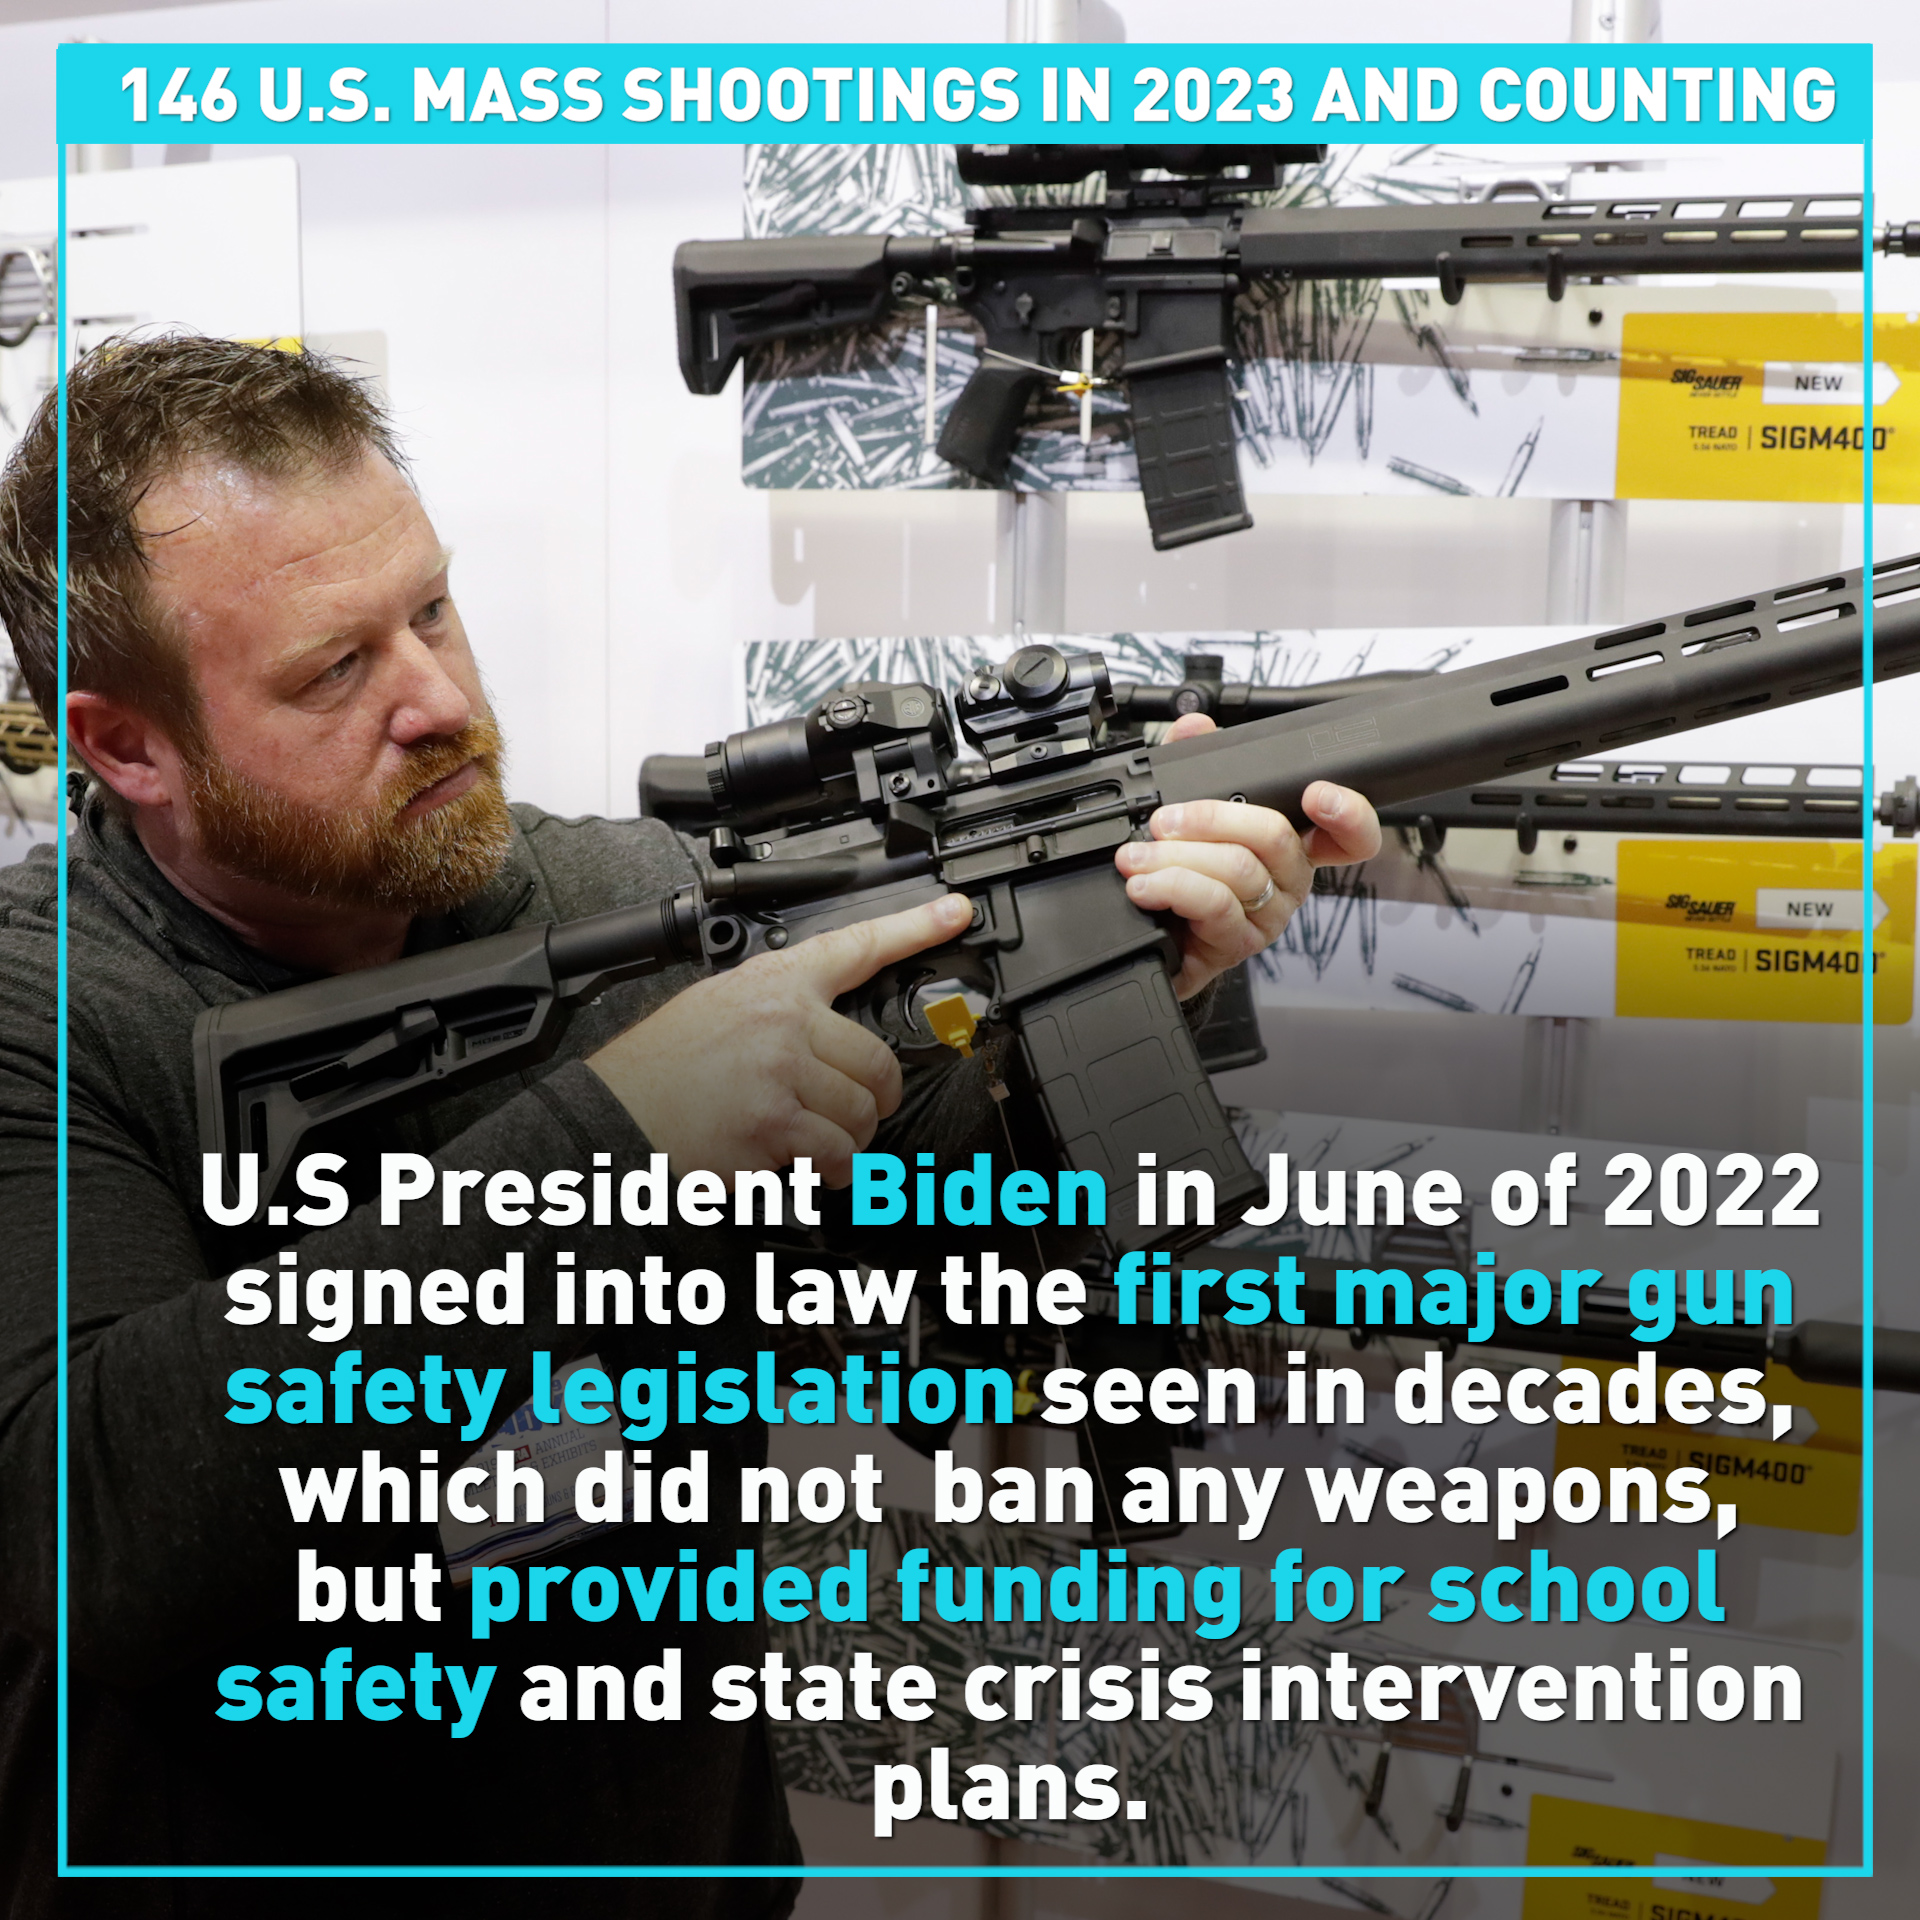 United States sees 146 mass shootings in 2023, and counting 